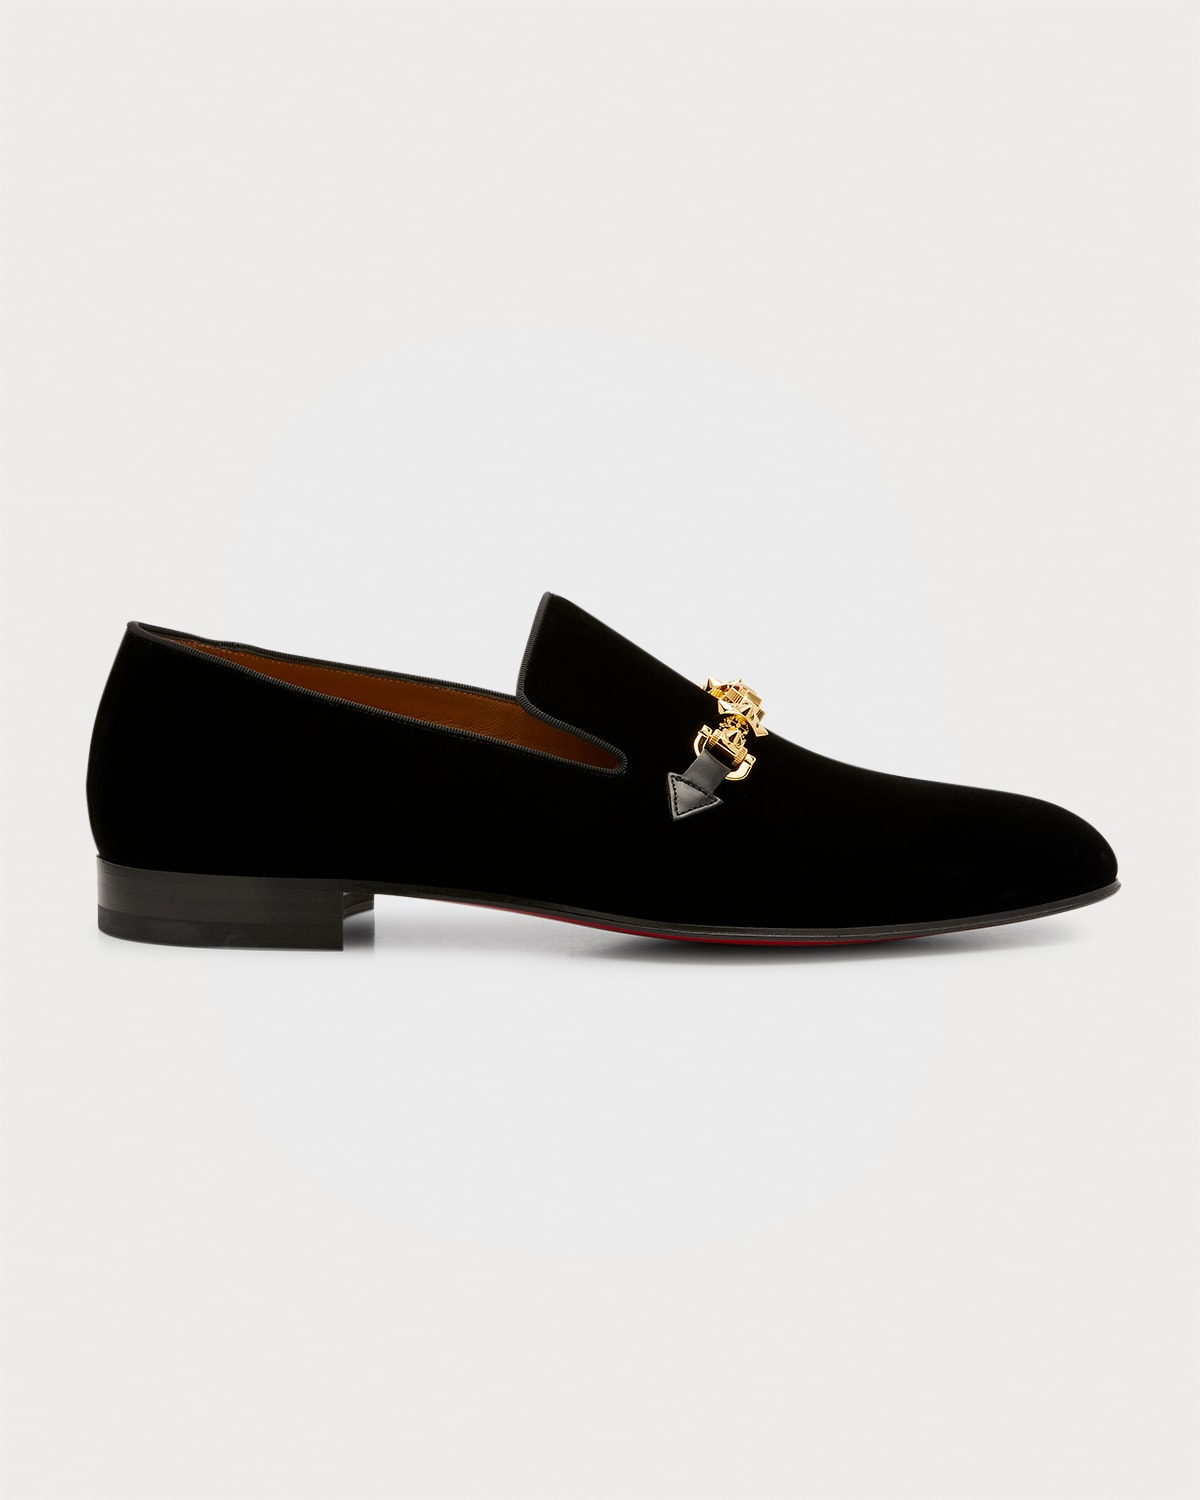 CHRISTIAN LOUBOUTIN MEN'S EQUISWING SPIKE STRAP LOAFERS